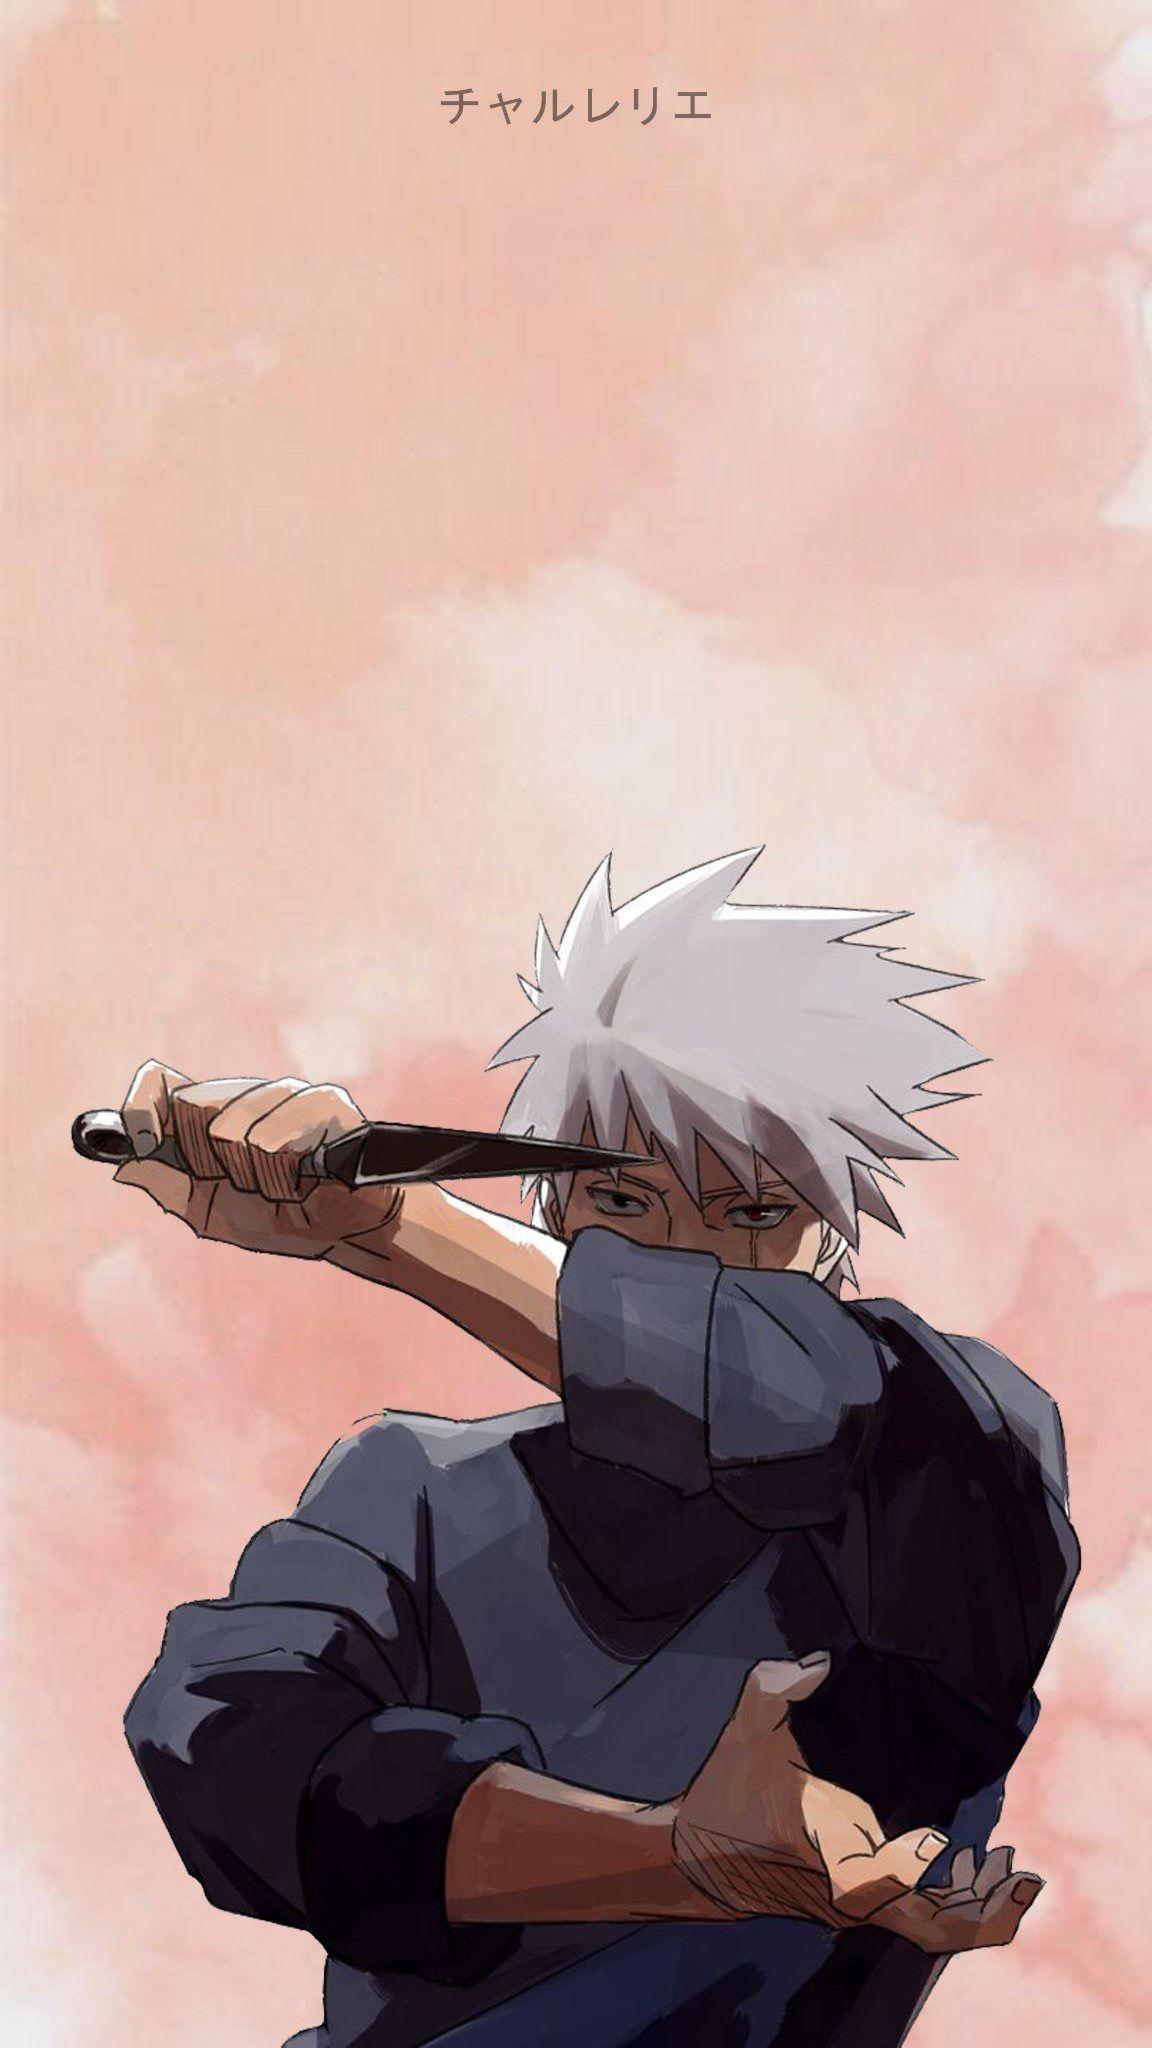 Cute Kakashi Wallpapers Top Free Cute Kakashi Backgrounds Wallpaperaccess Posted by moerdiati lalo posted on november 19, 2018 with no comments. cute kakashi wallpapers top free cute